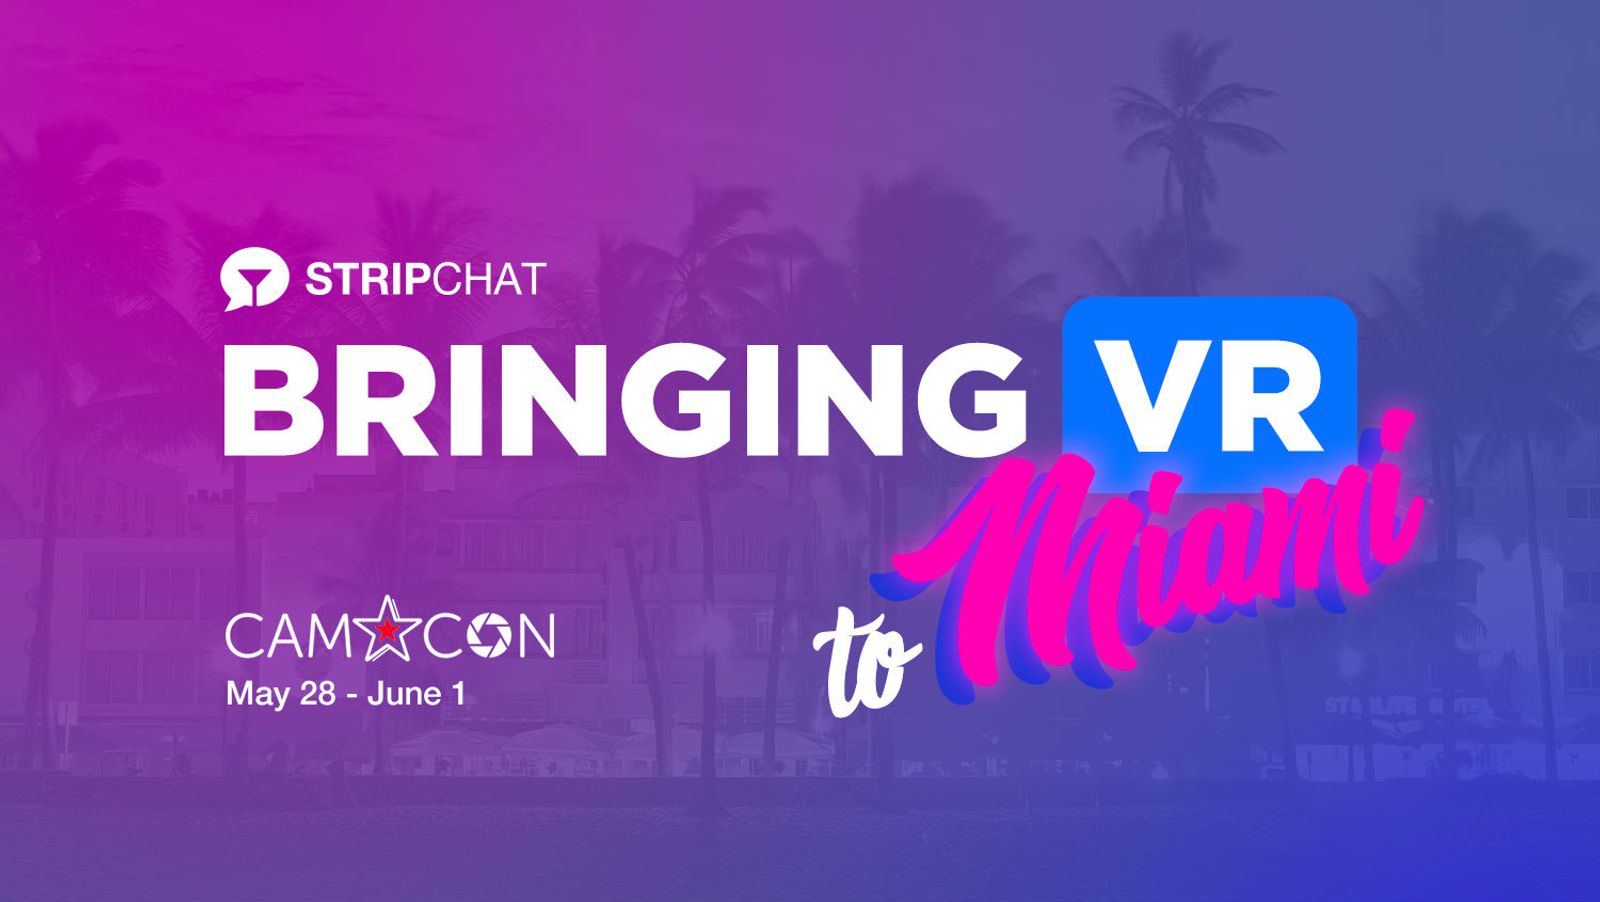 Stripchat Brings VR Tech to CamCon